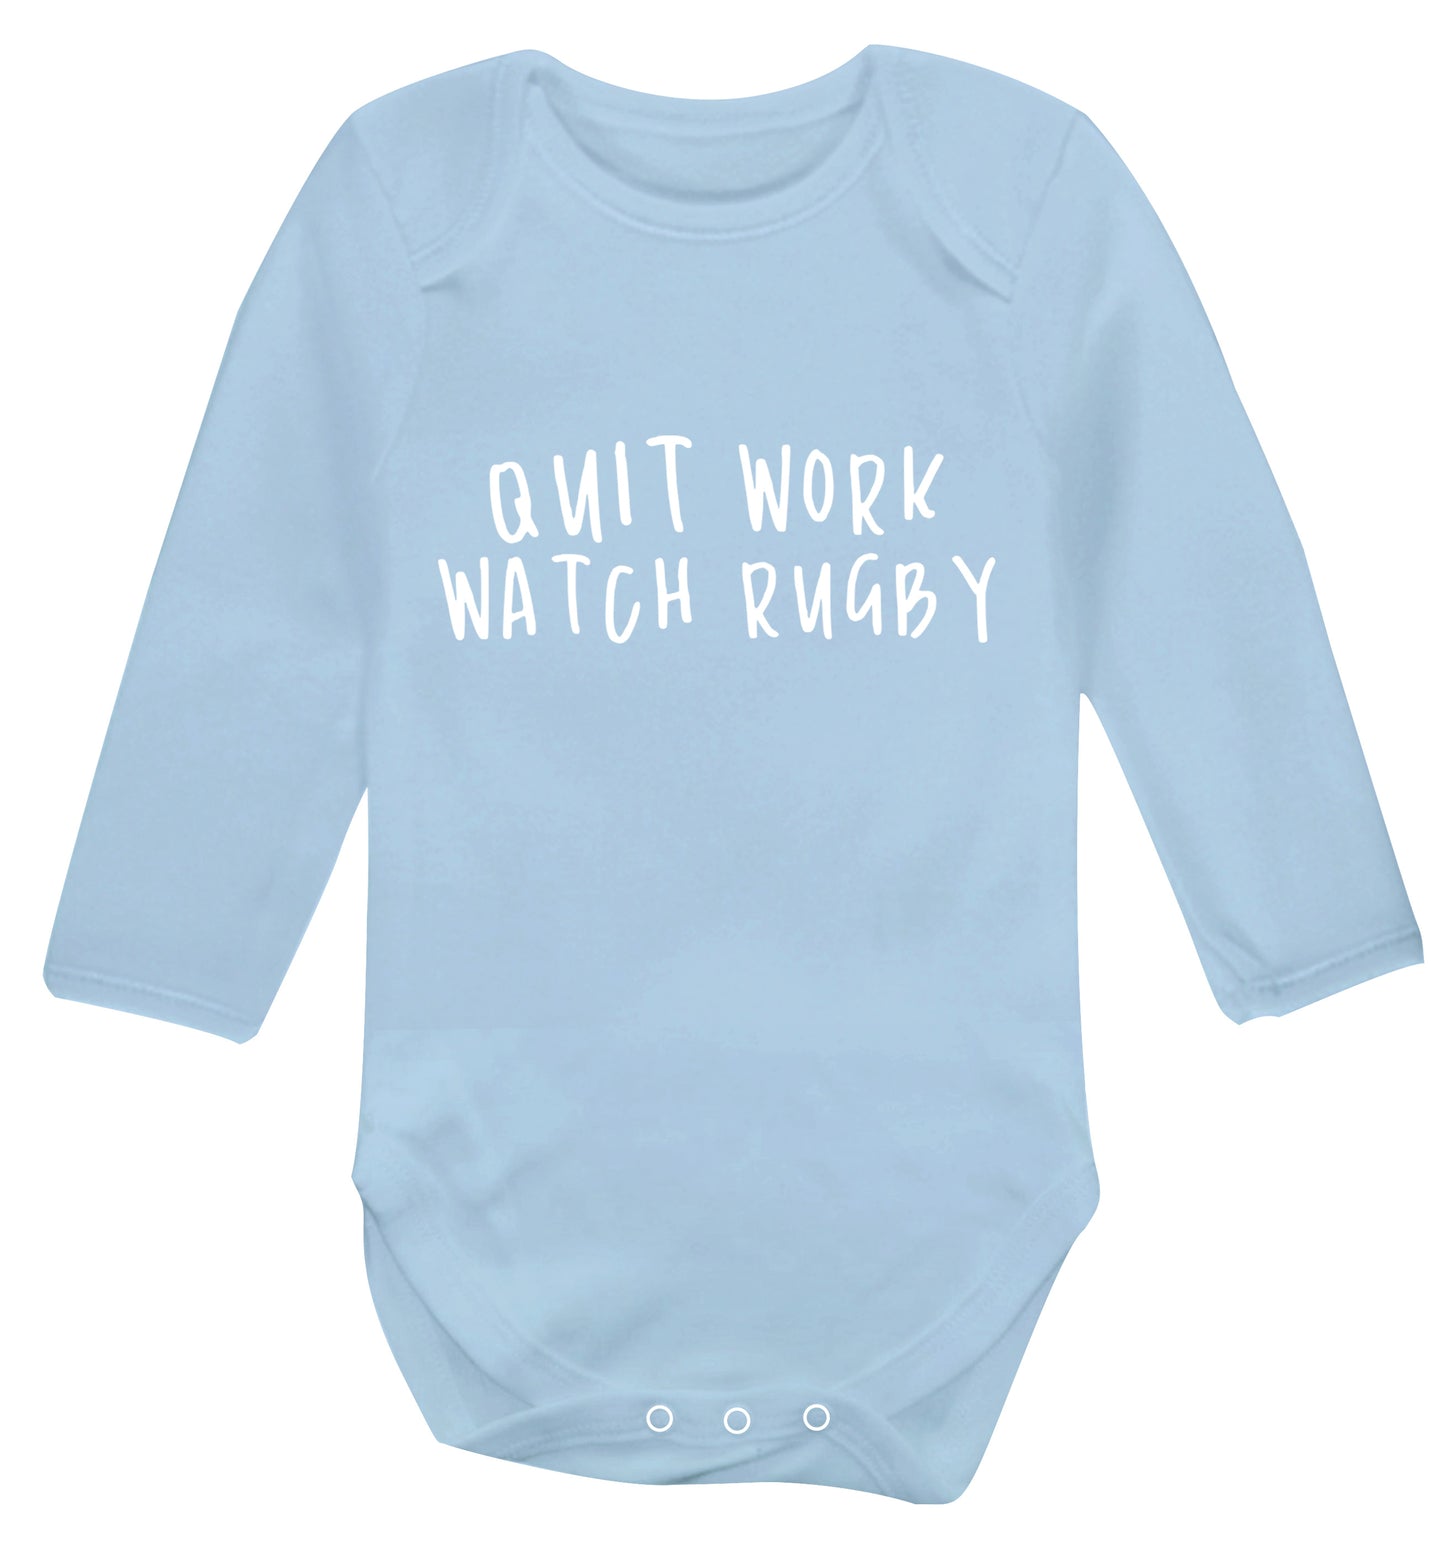 Quit work watch rugby Baby Vest long sleeved pale blue 6-12 months